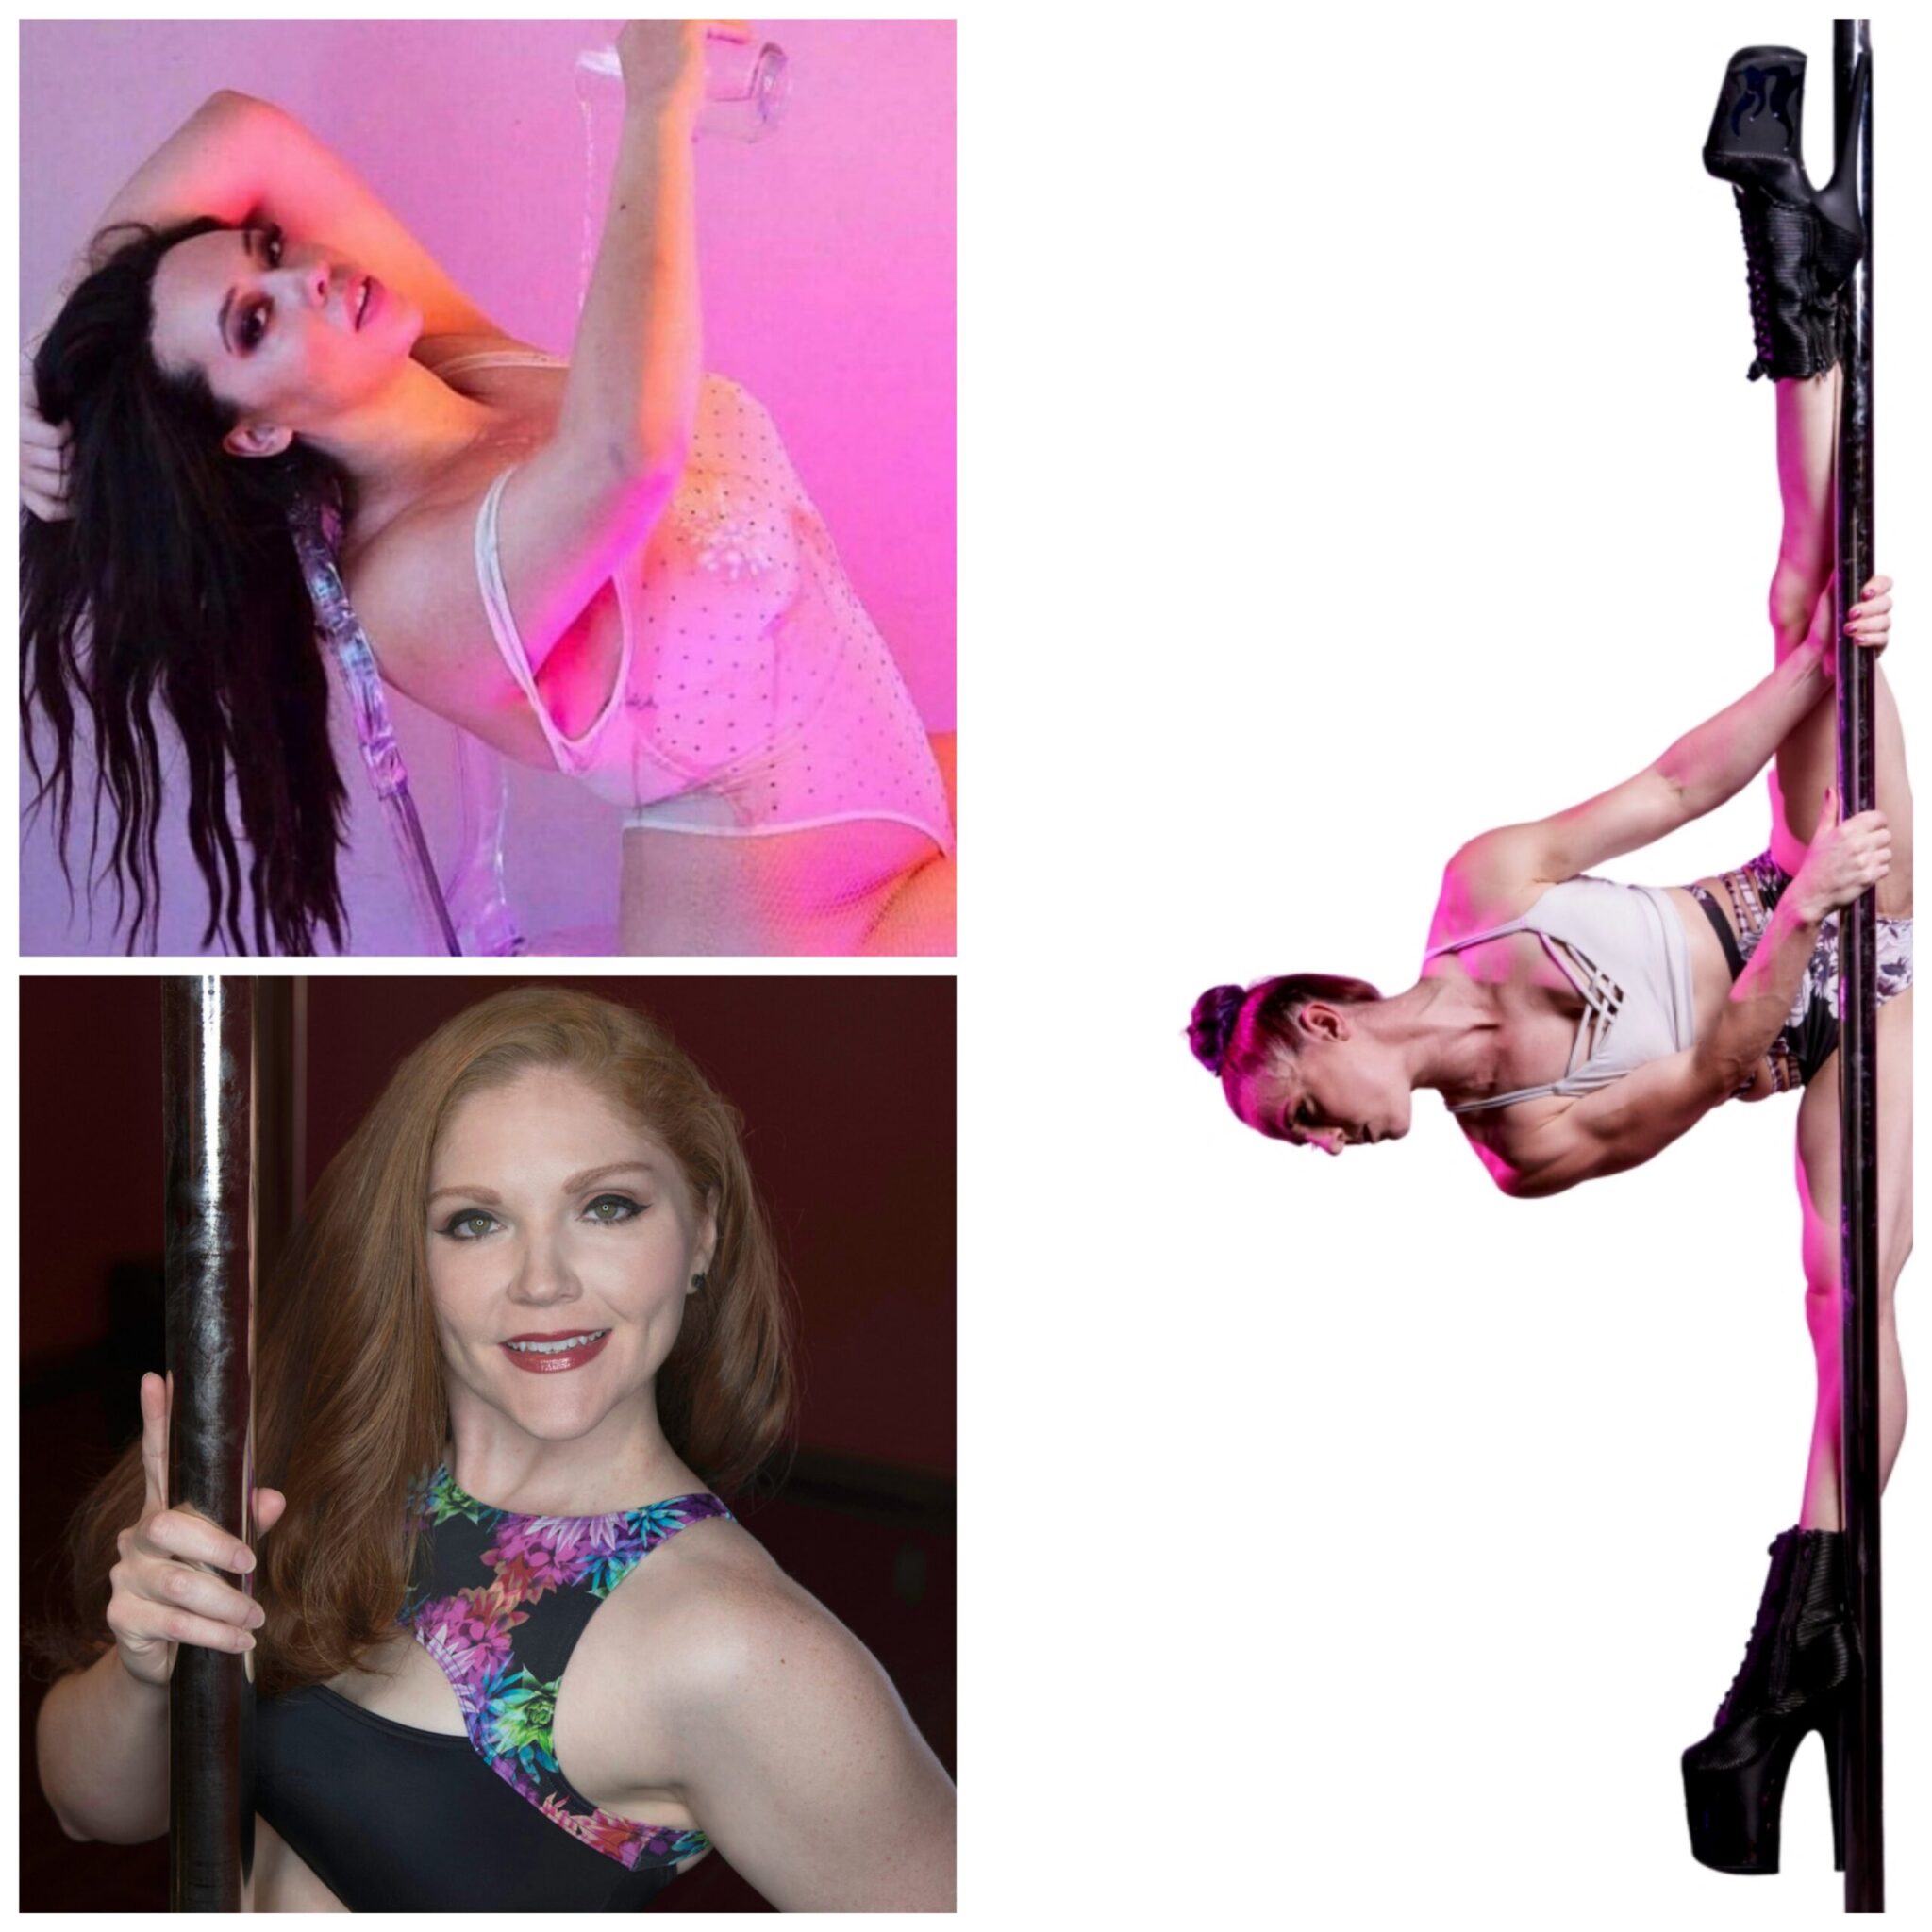 three images, two pole dancer head-shots and one doing pole splits.